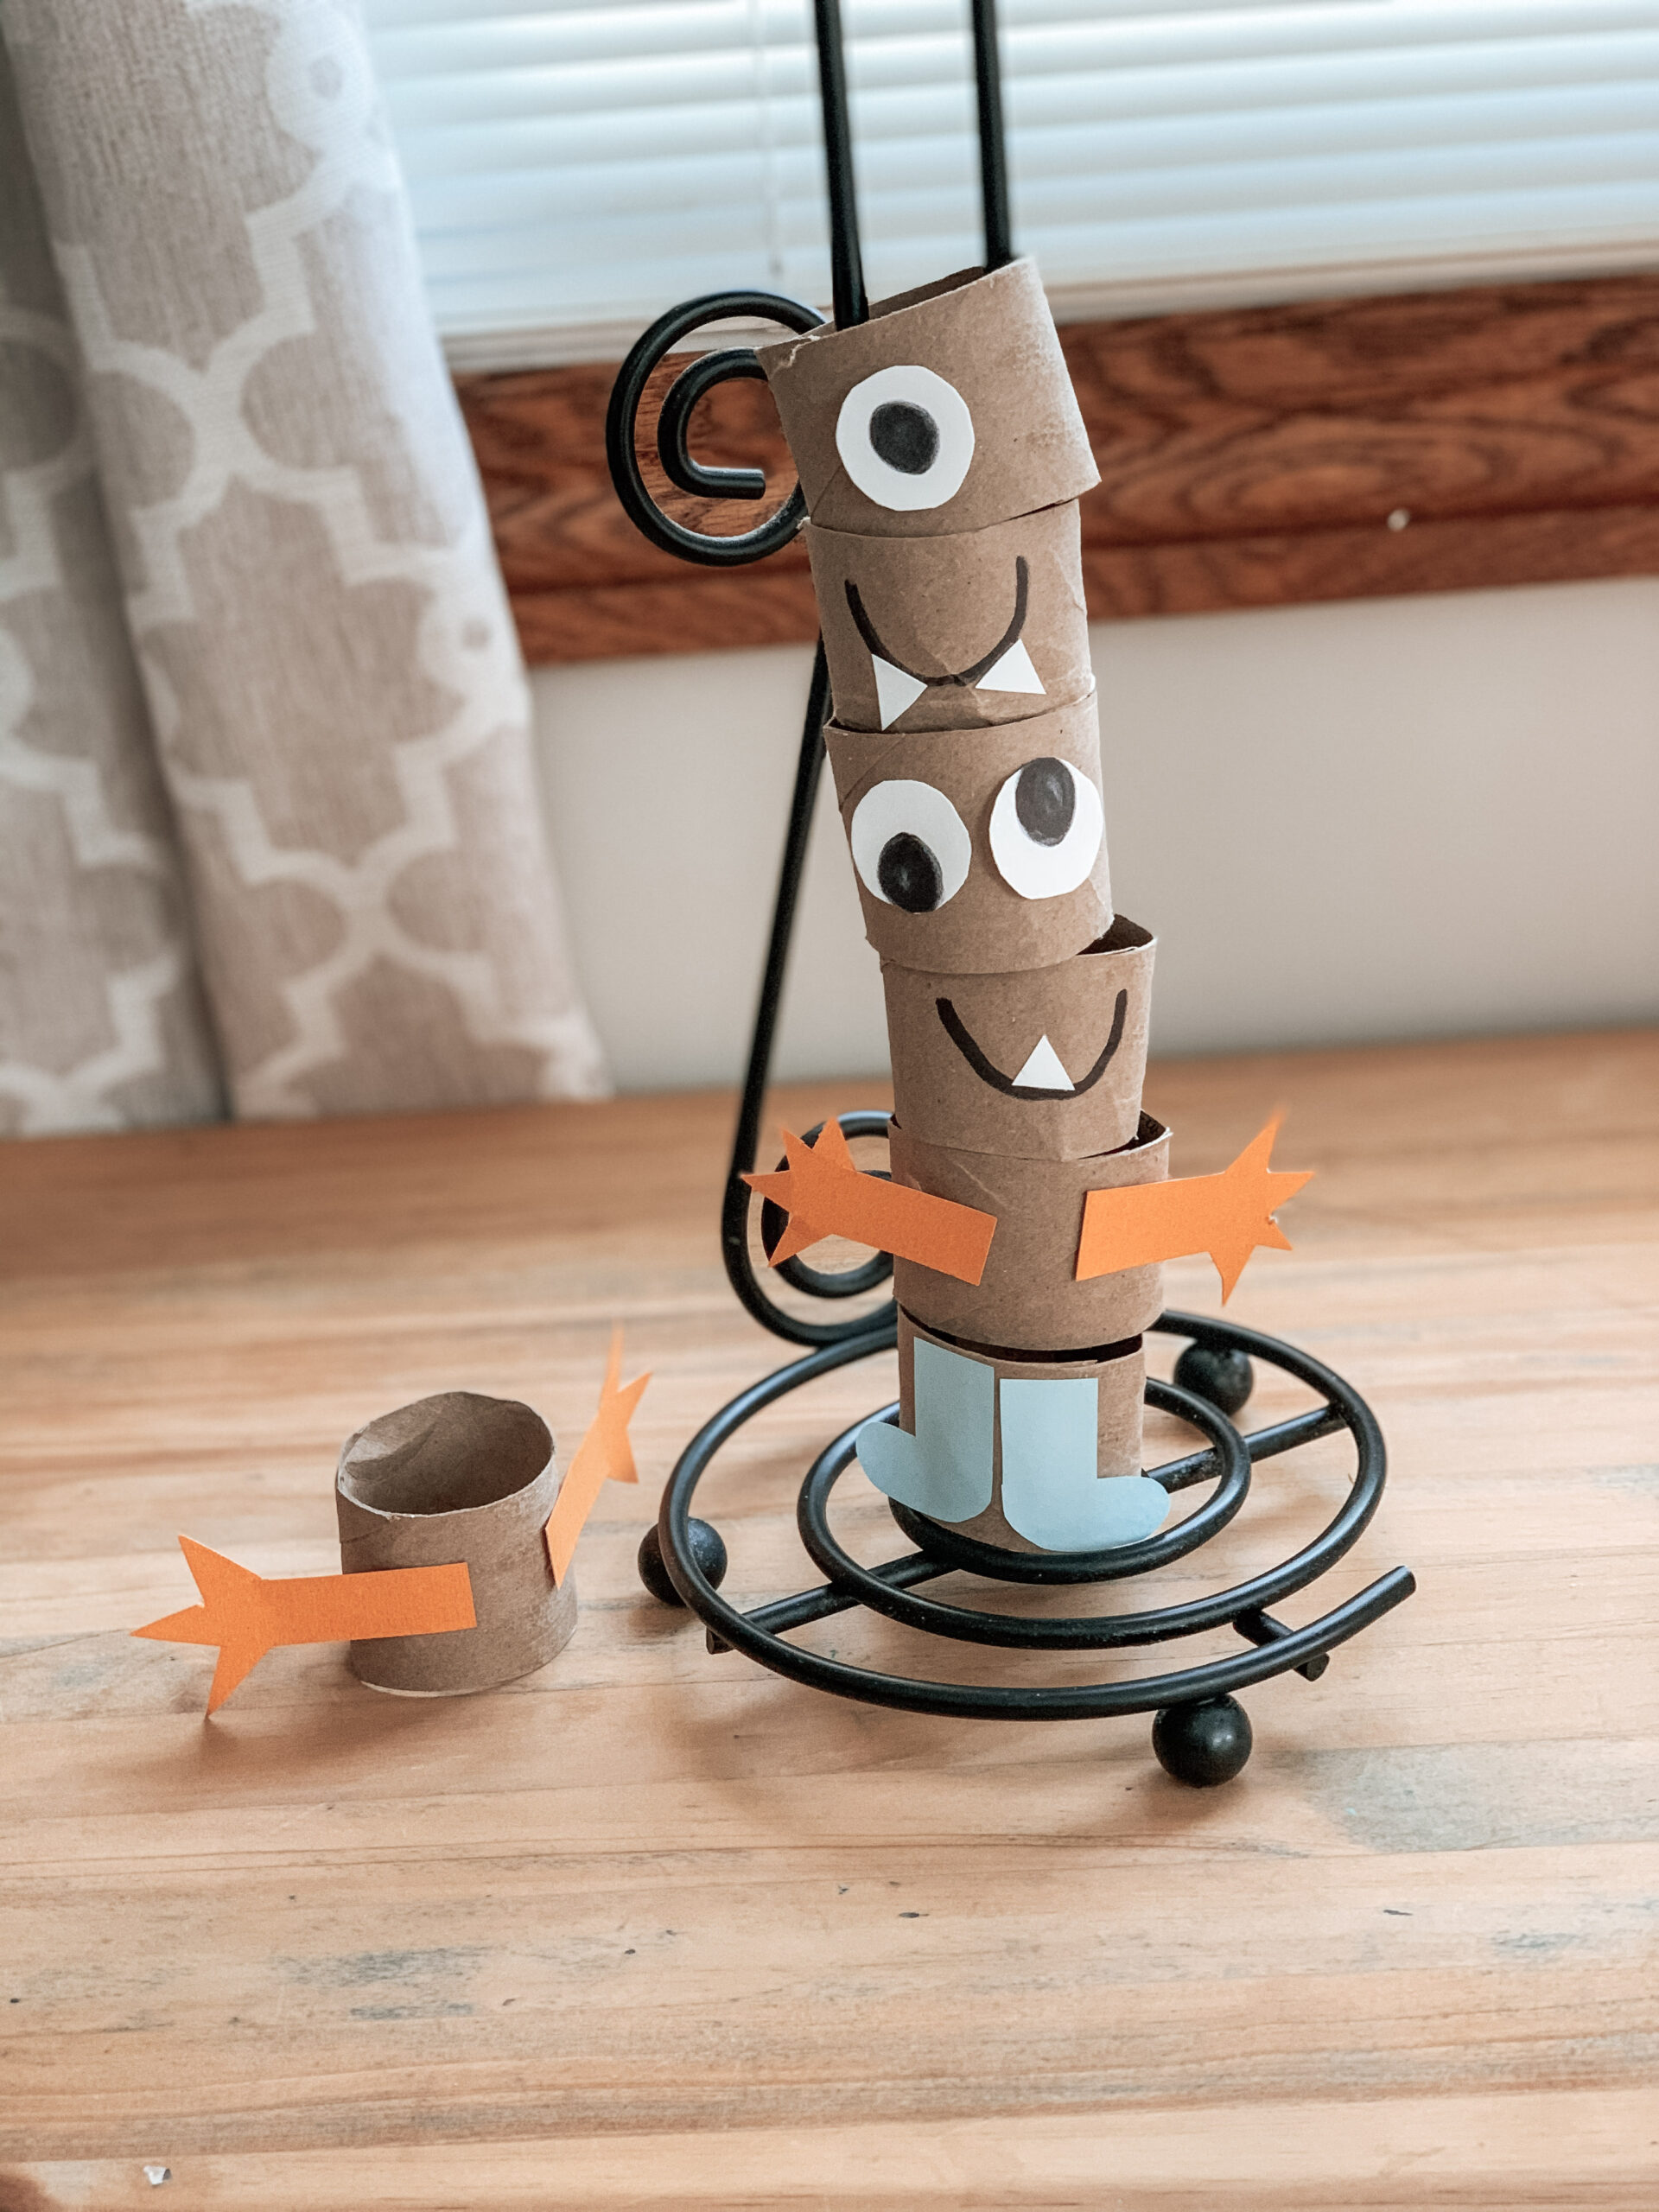 Completed repurposed monster craft using toilet paper rolls and ready for kid's to play with